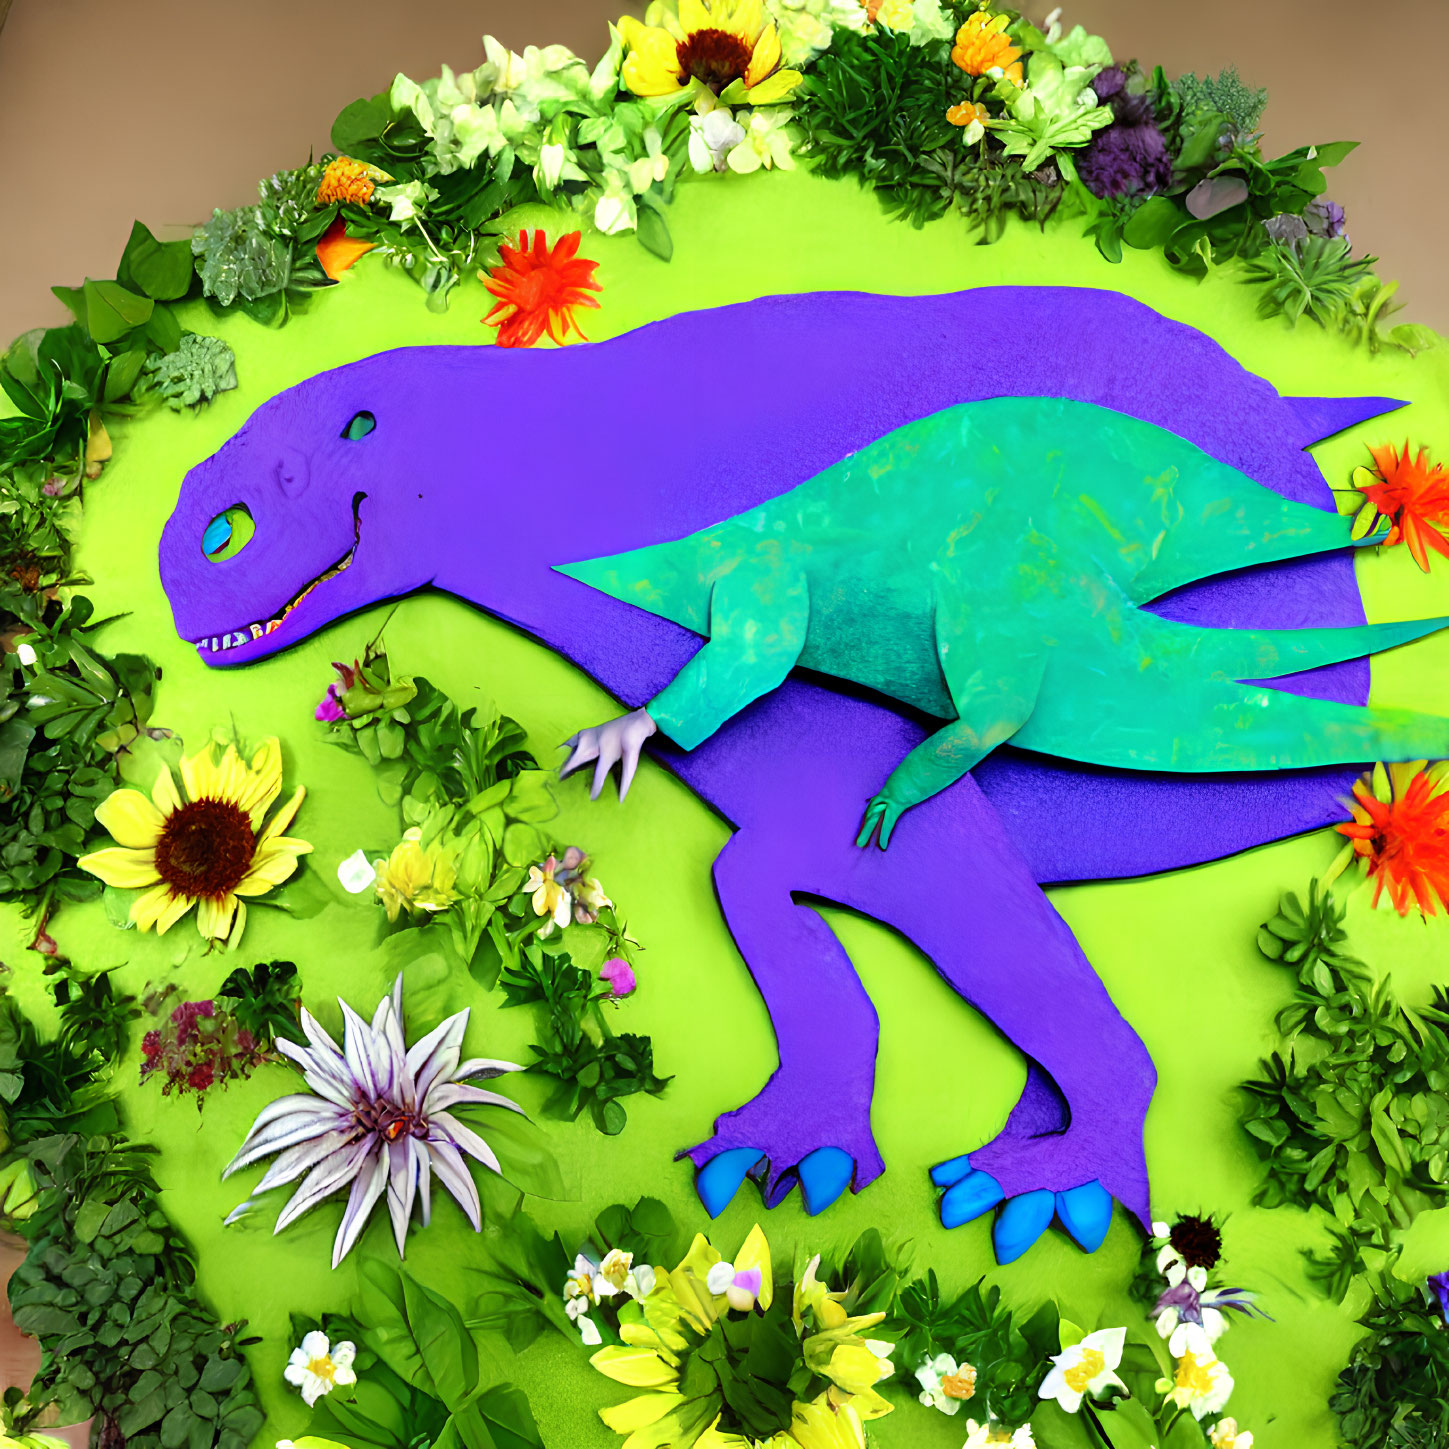 Vibrant purple and green dinosaur in floral setting